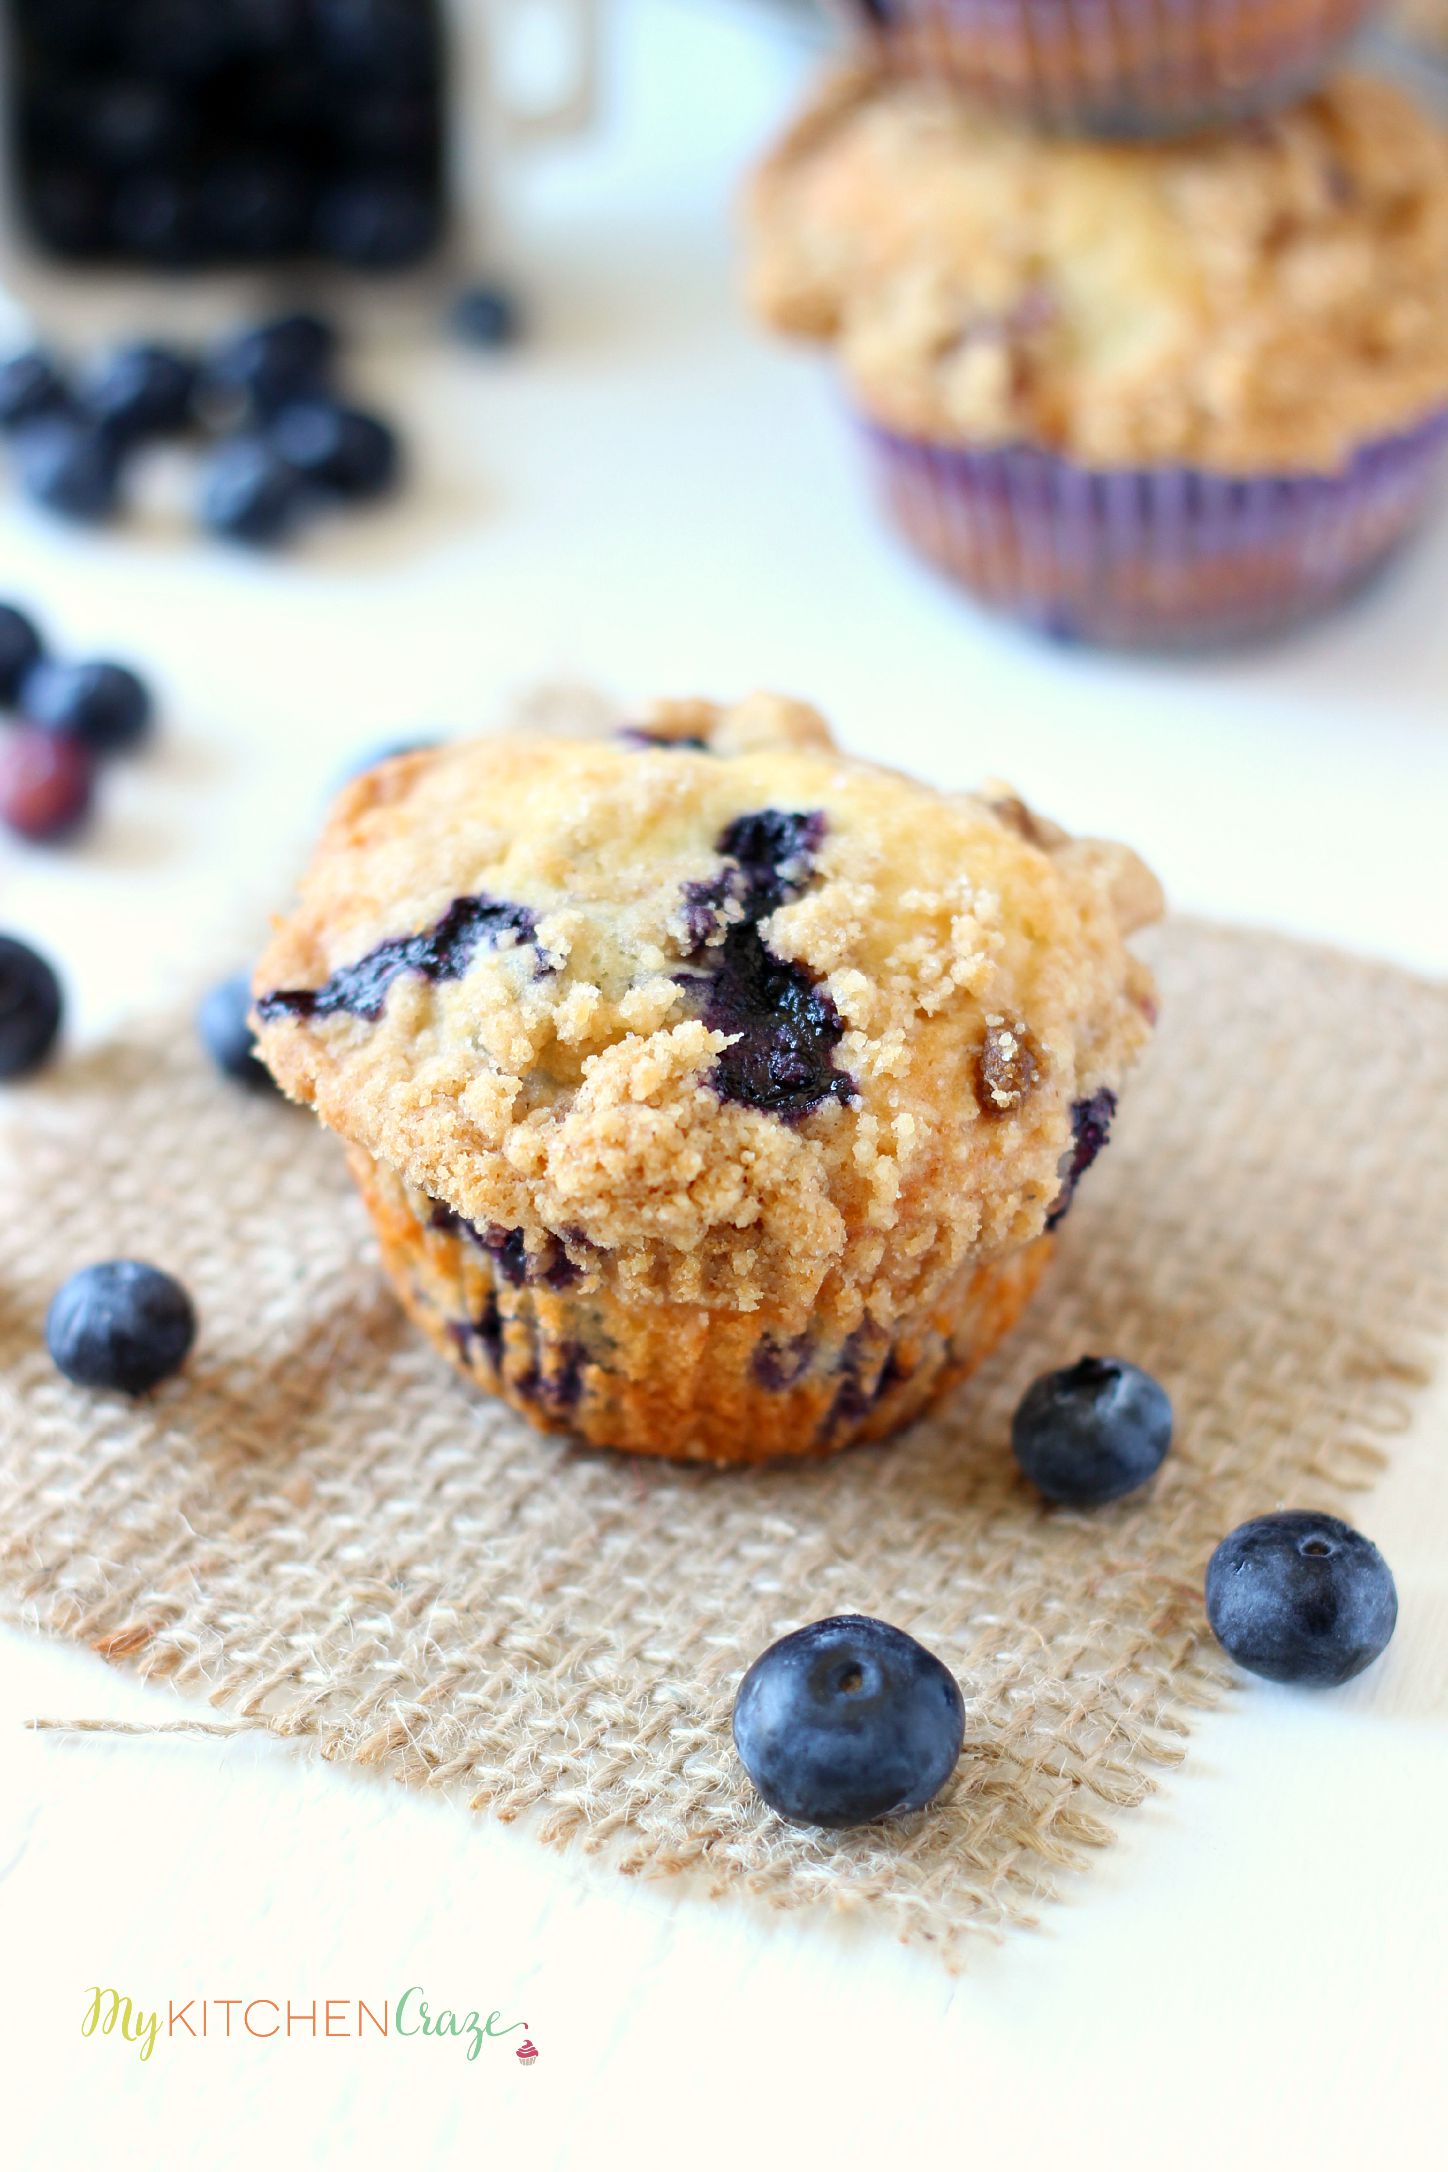 Blueberry Crumb Muffins ~ mykitchencraze.com ~ Muffins are perfect for breakfast. These muffins are loaded with juicy blueberries then topped with a crumb topping.